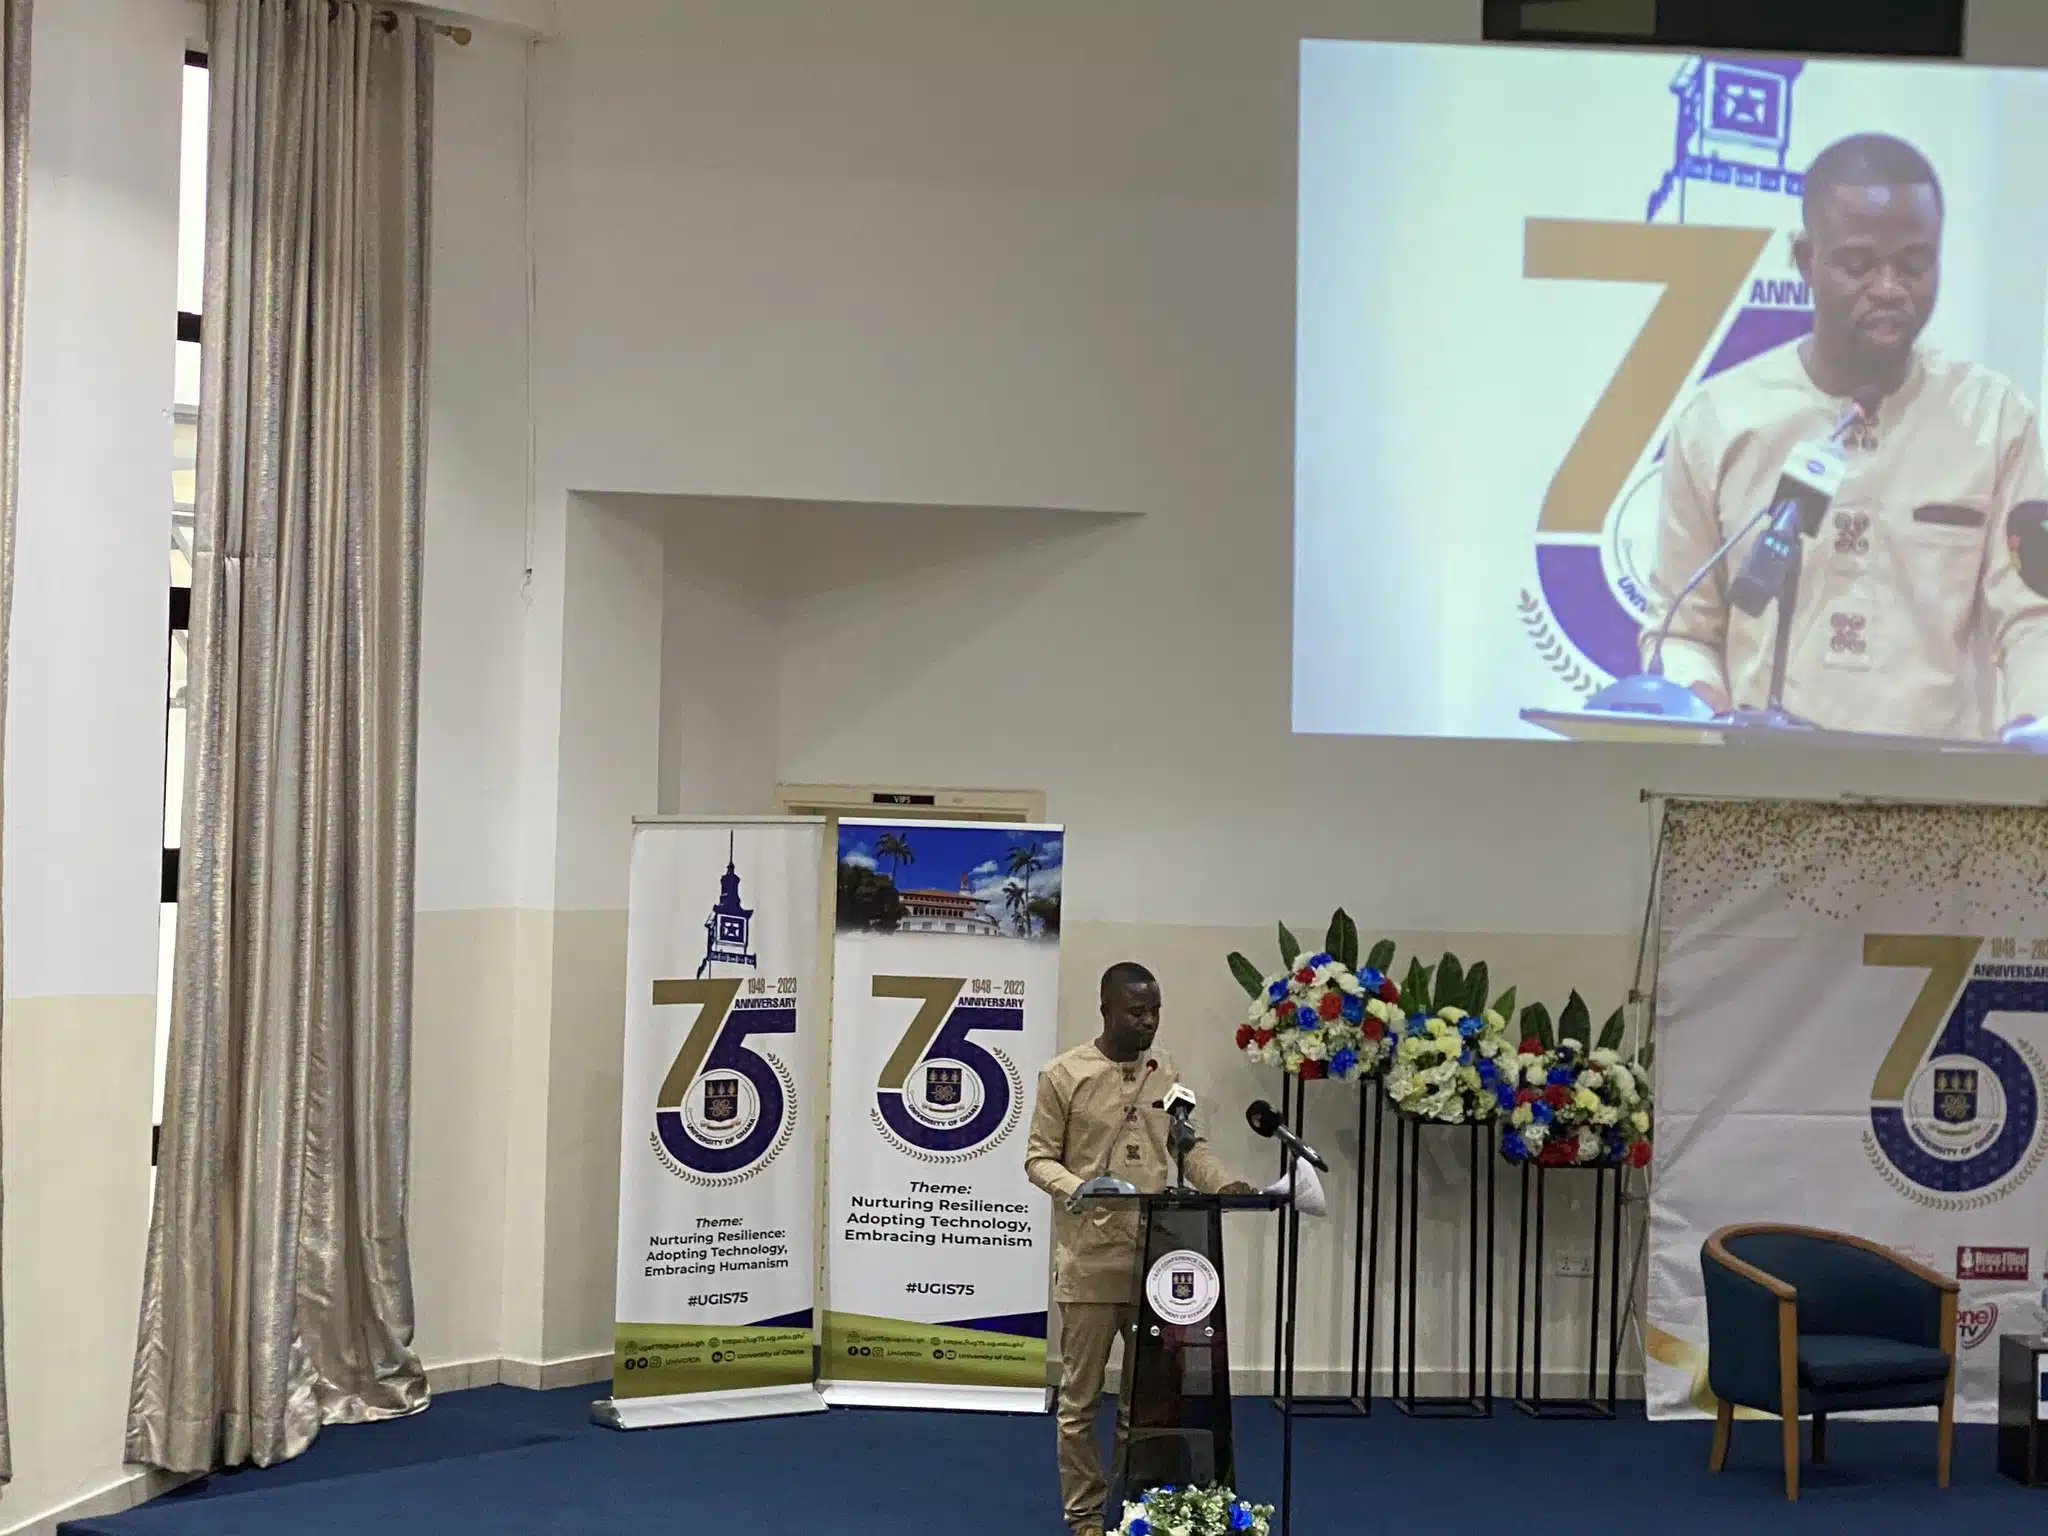 Manasseh Azure Awuni delivering the Public lecture as part of University of Ghana's 75th anniversary.